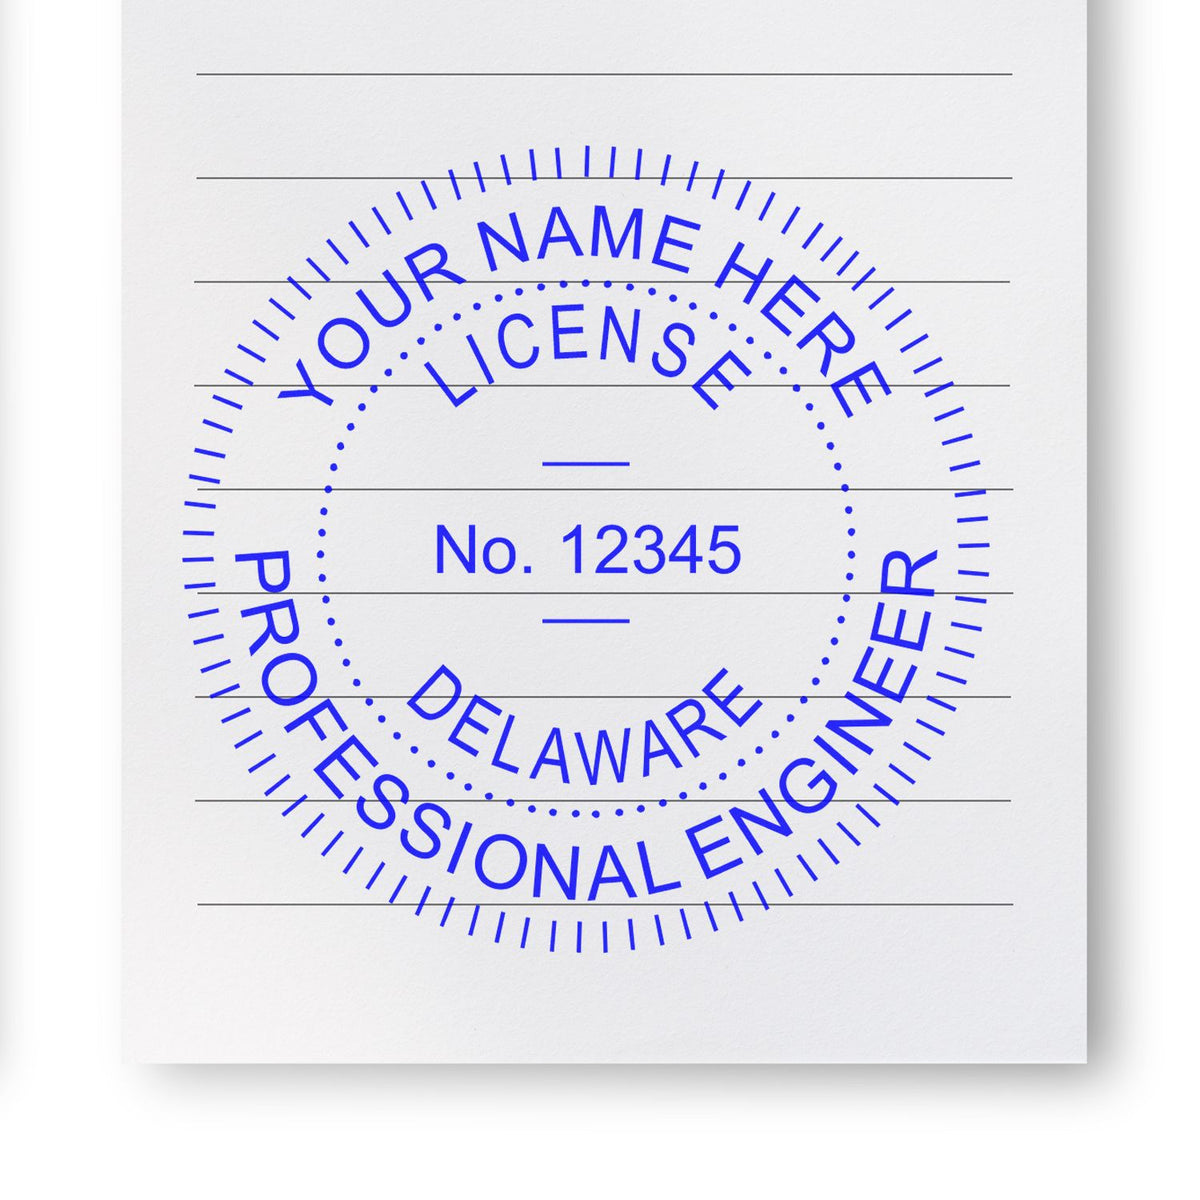 The Slim Pre-Inked Delaware Professional Engineer Seal Stamp stamp impression comes to life with a crisp, detailed photo on paper - showcasing true professional quality.